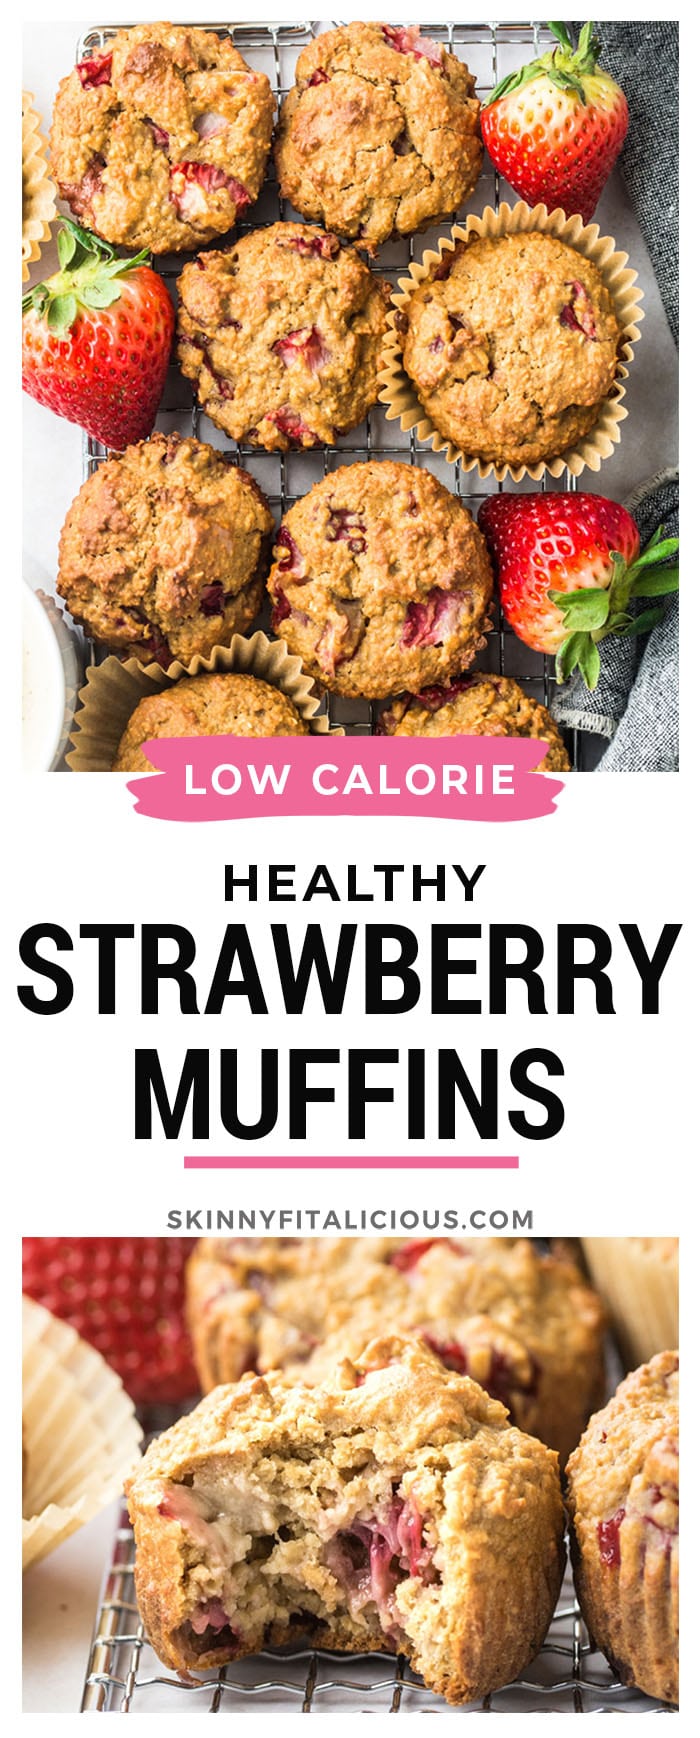 Healthy Strawberry Greek Yogurt Muffins! Bursting with strawberries and creamy greek yogurt, these easy to make muffins make a delicious low calorie breakfast or snack. Quick to make and gluten free too!